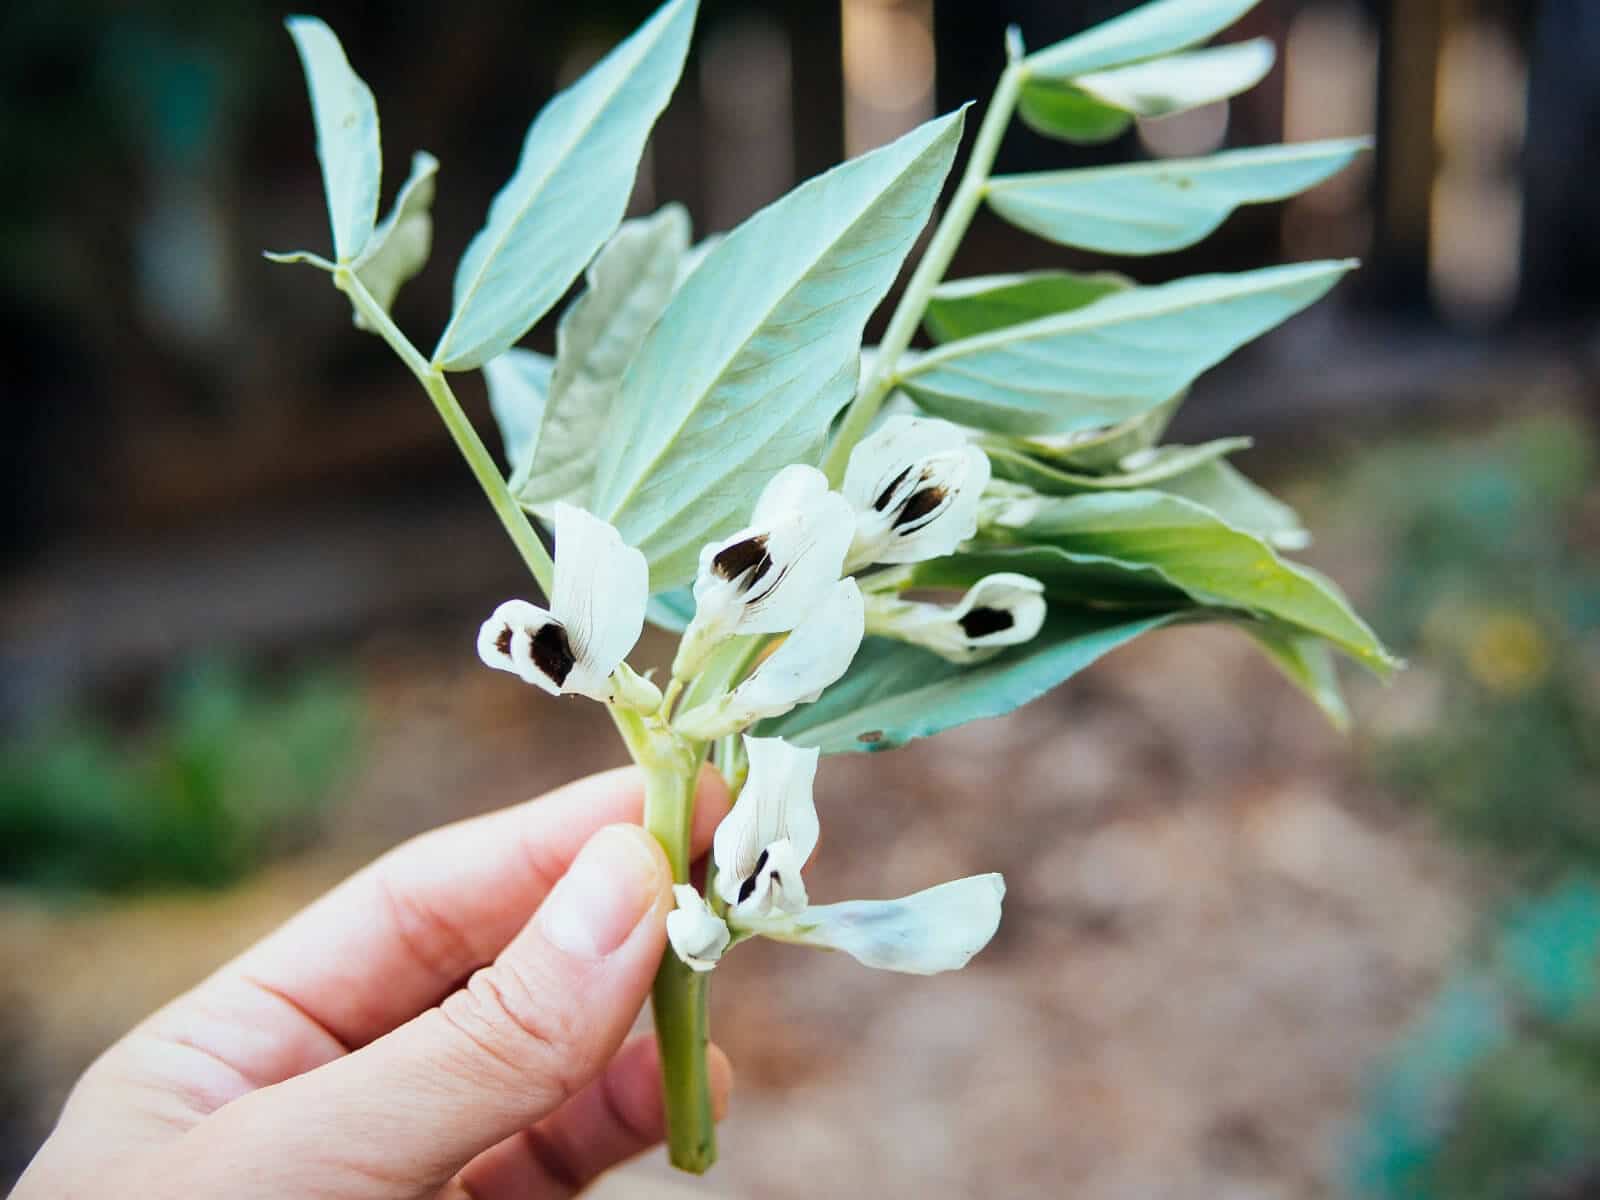 Holding up a sprig of edible fava bean leaves and fava bean flowers